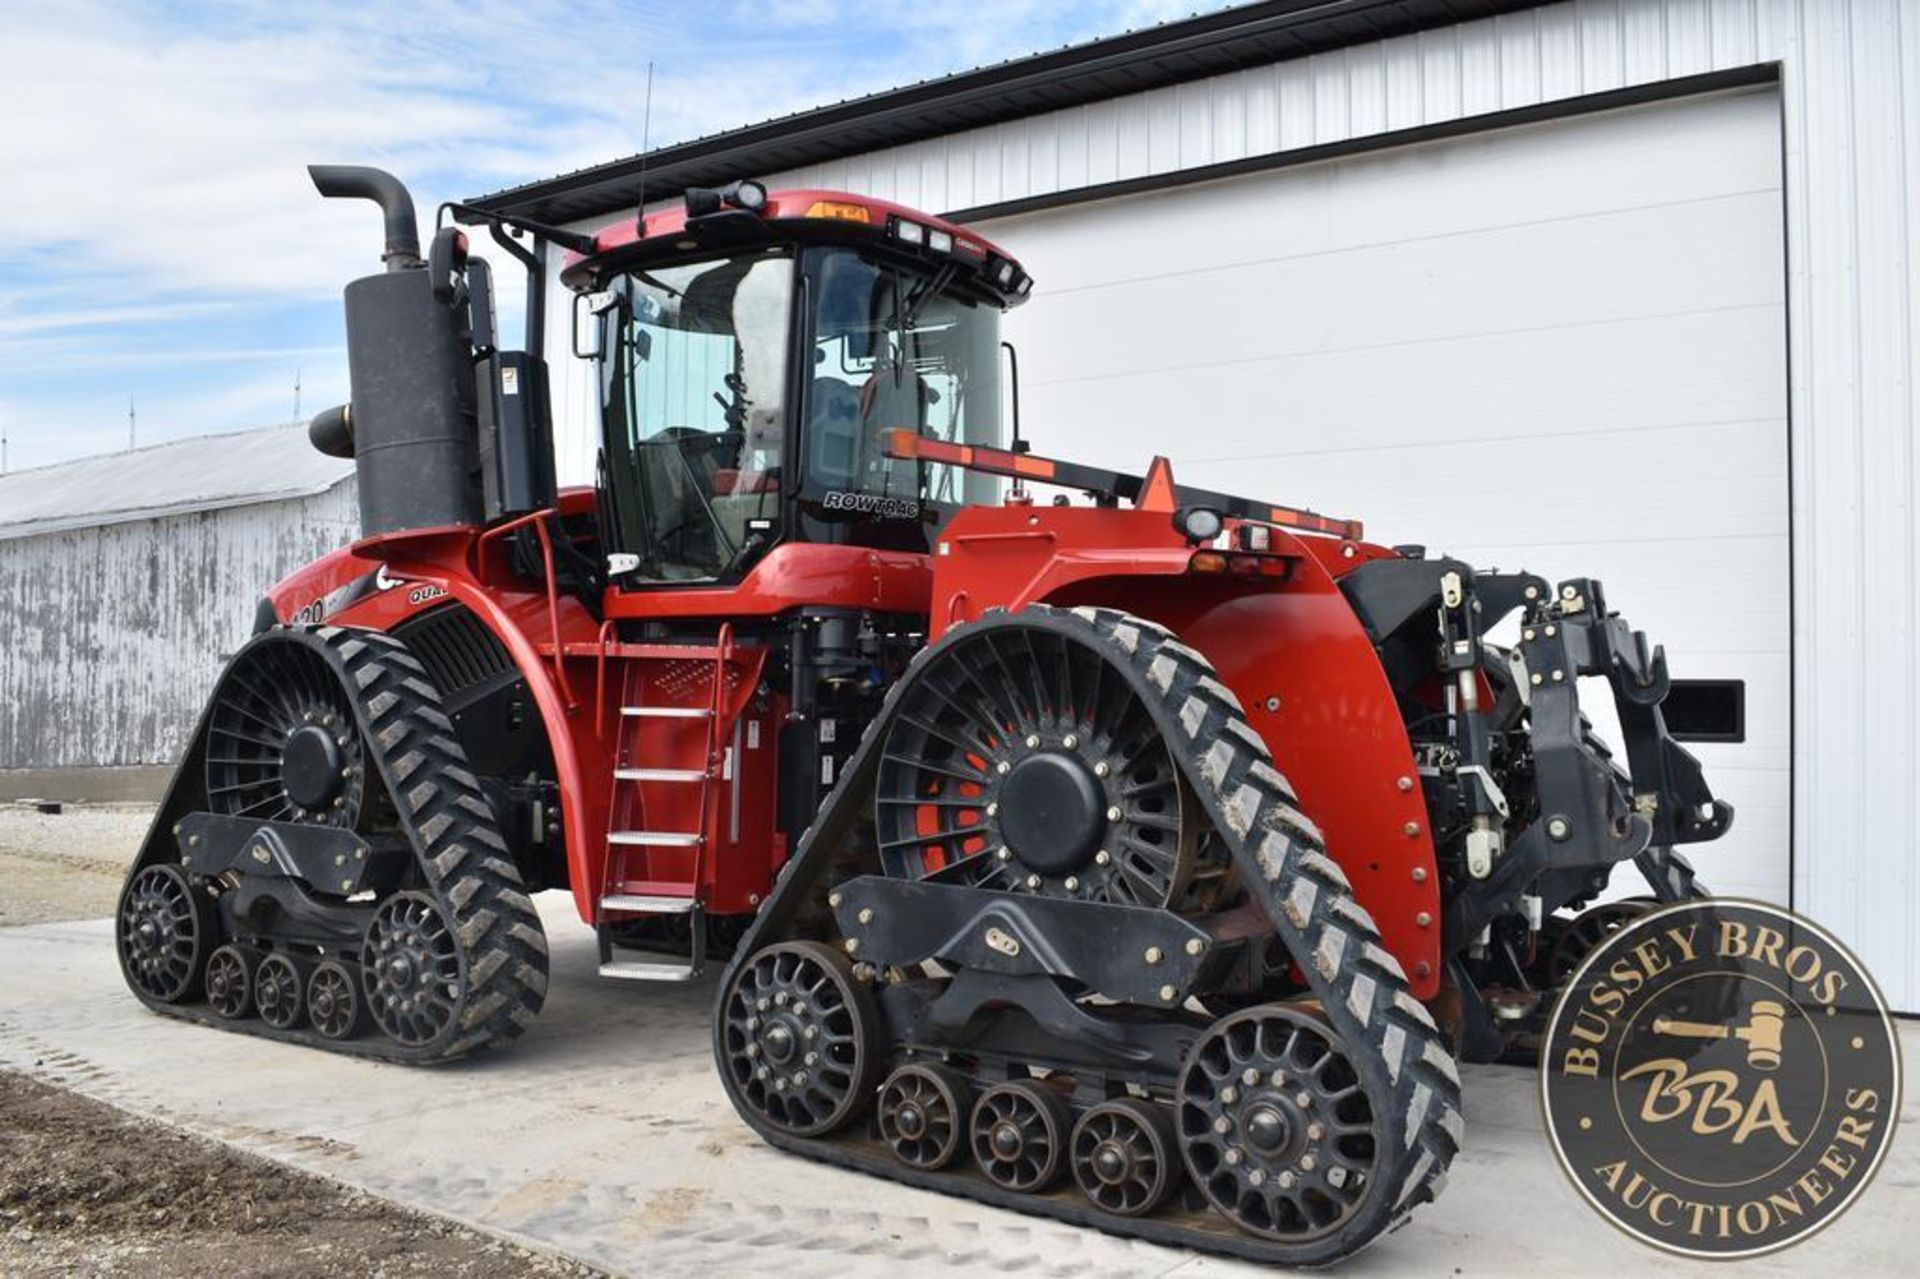 2014 CASE IH STEIGER 420 AFS ROWTRAC 26005 - Image 10 of 99